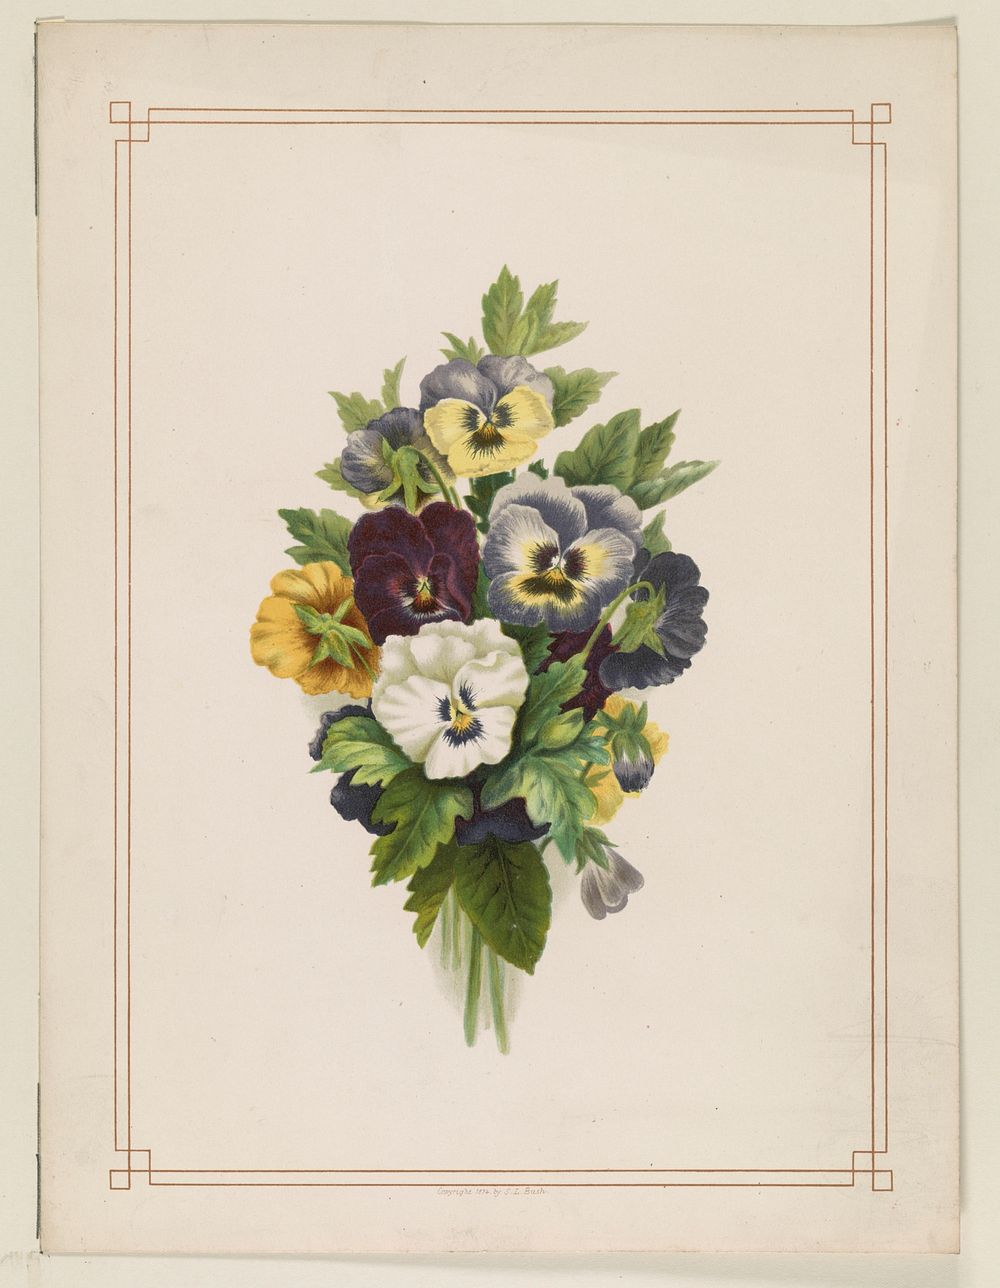 Pansies (1874). Original from the Library of Congress.